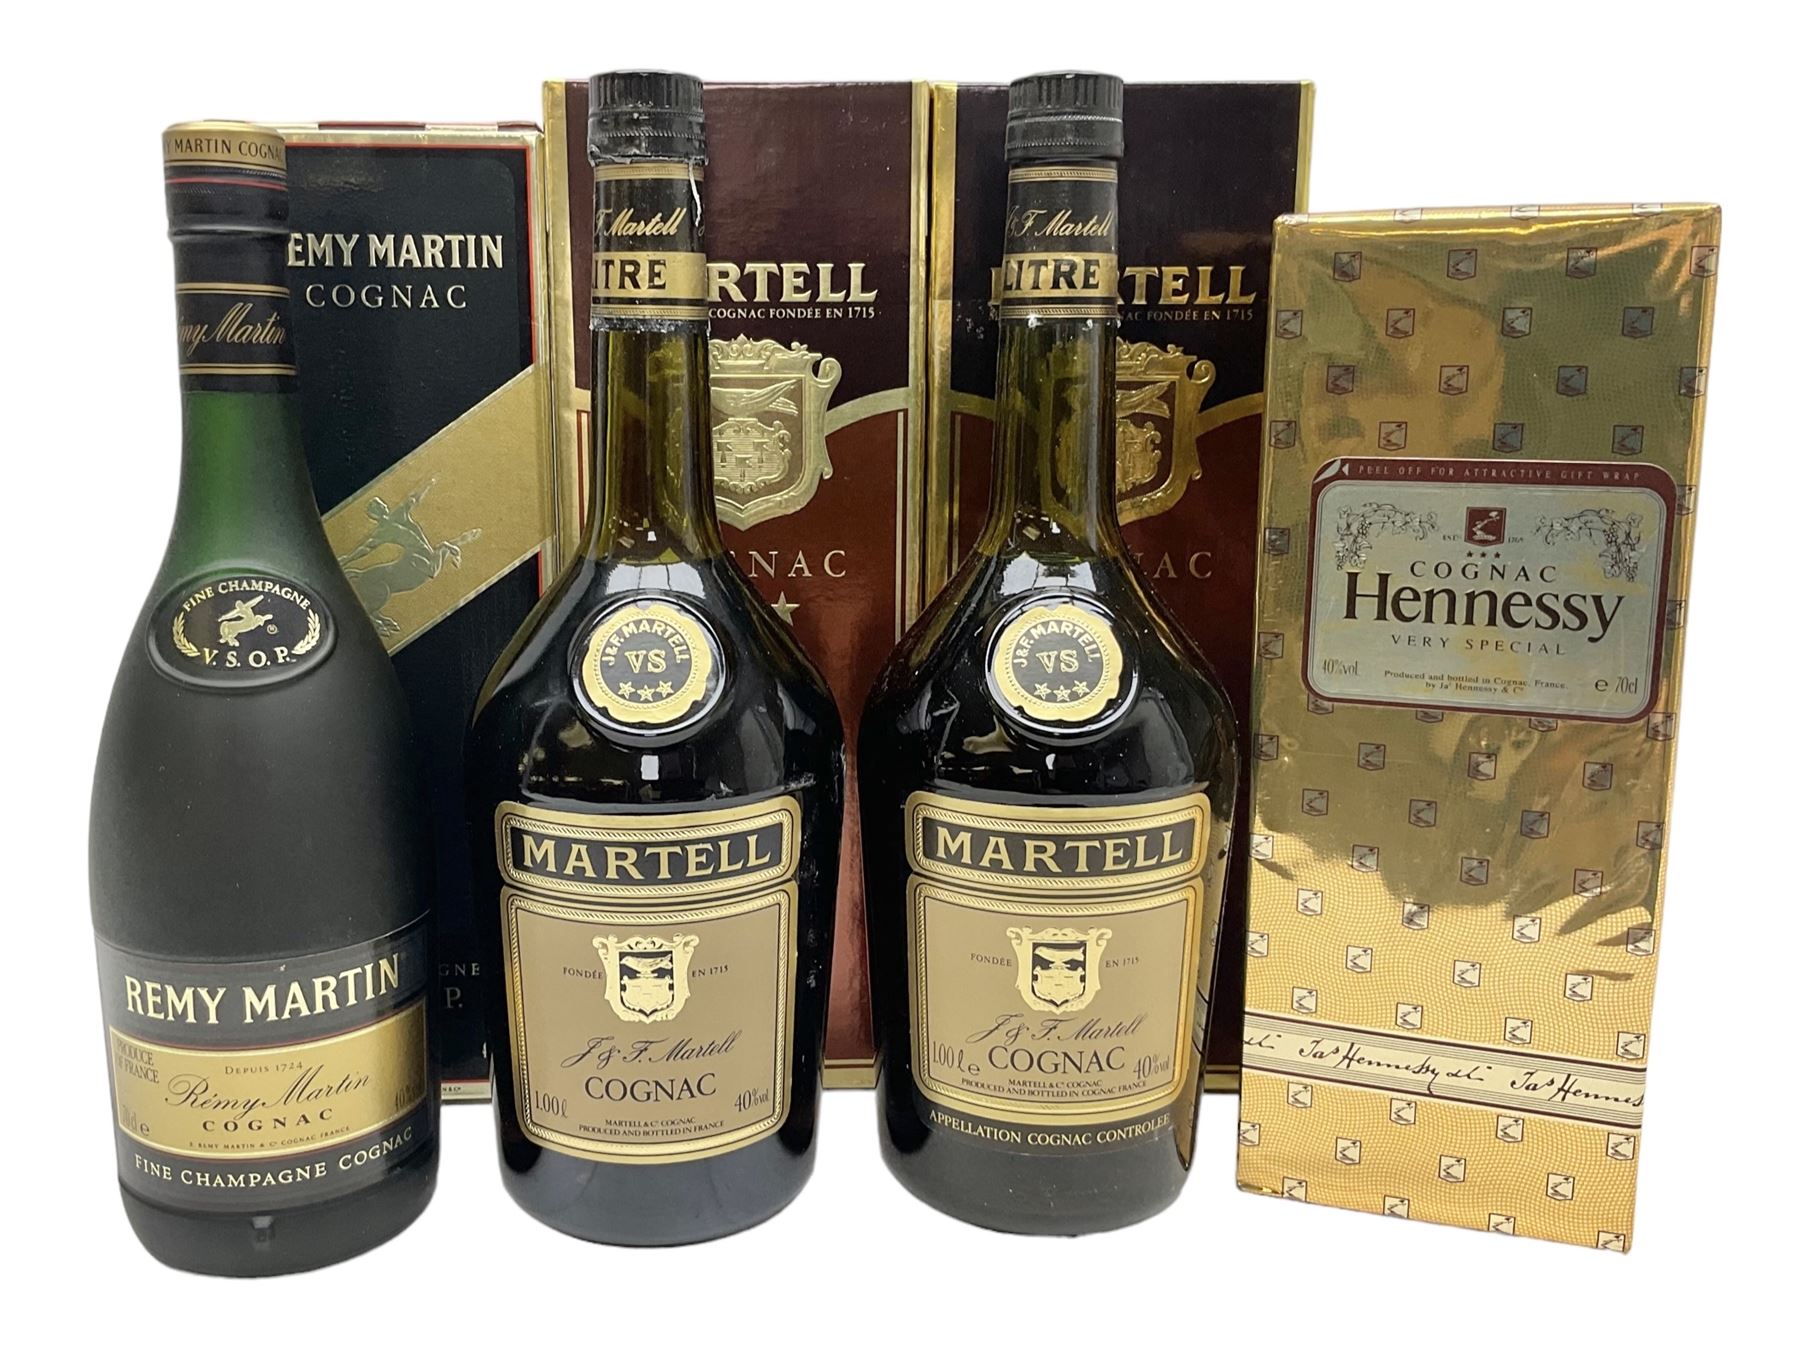 vol, 70cl Cognac, Very in bottle, presentation Martell Hennessy 40% Special box, one wrap gift